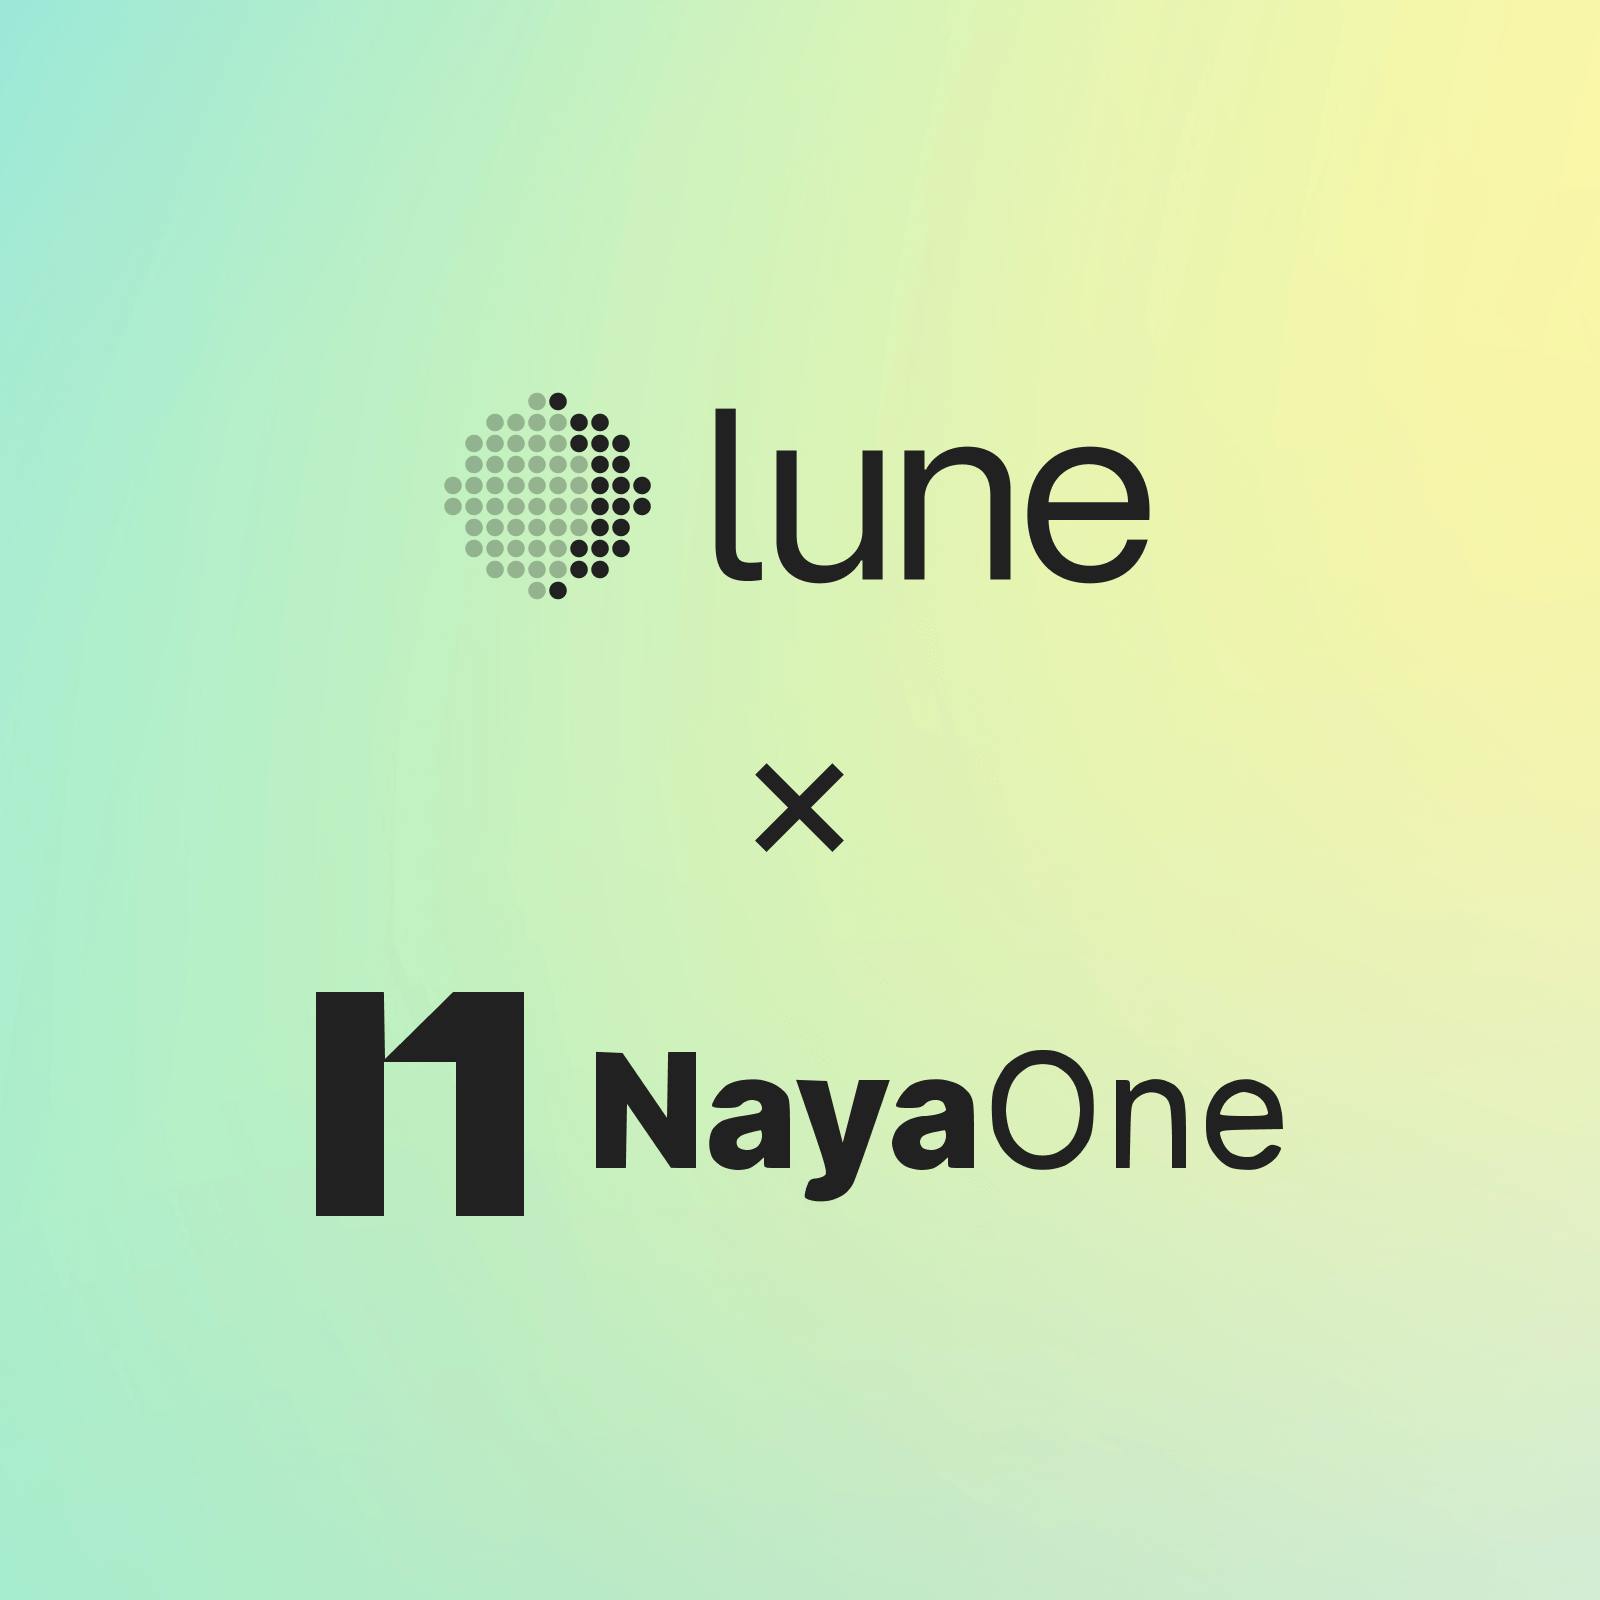 NayaOne partners with Lune to make banking climate positive